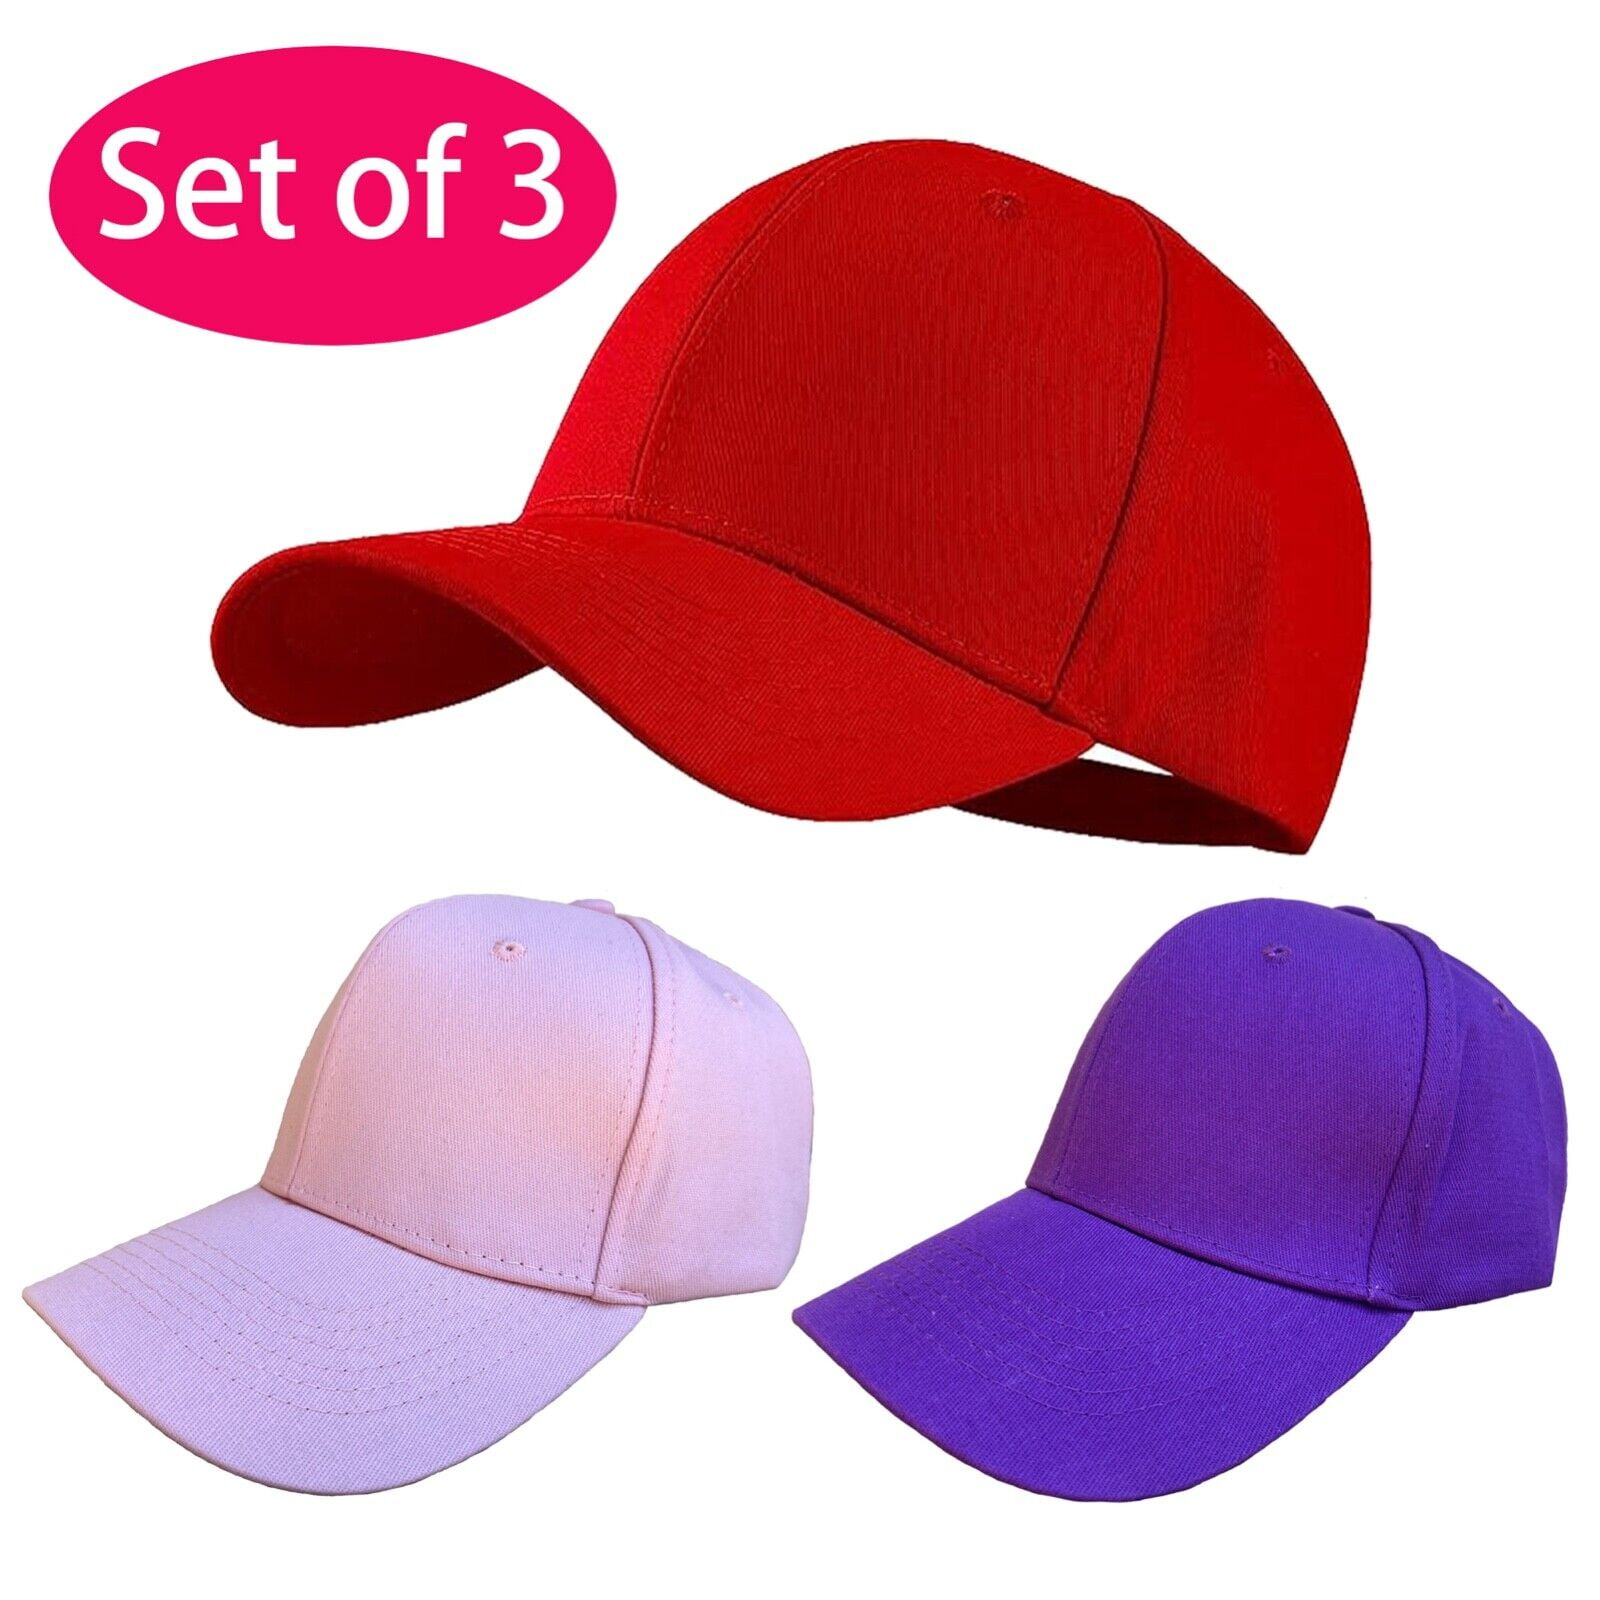 Women Baseball Hats, Set of Size Cotton One Adjustable Plain Fit Solid Polo-Style Cap, Structured Hat 3, 100% Flex